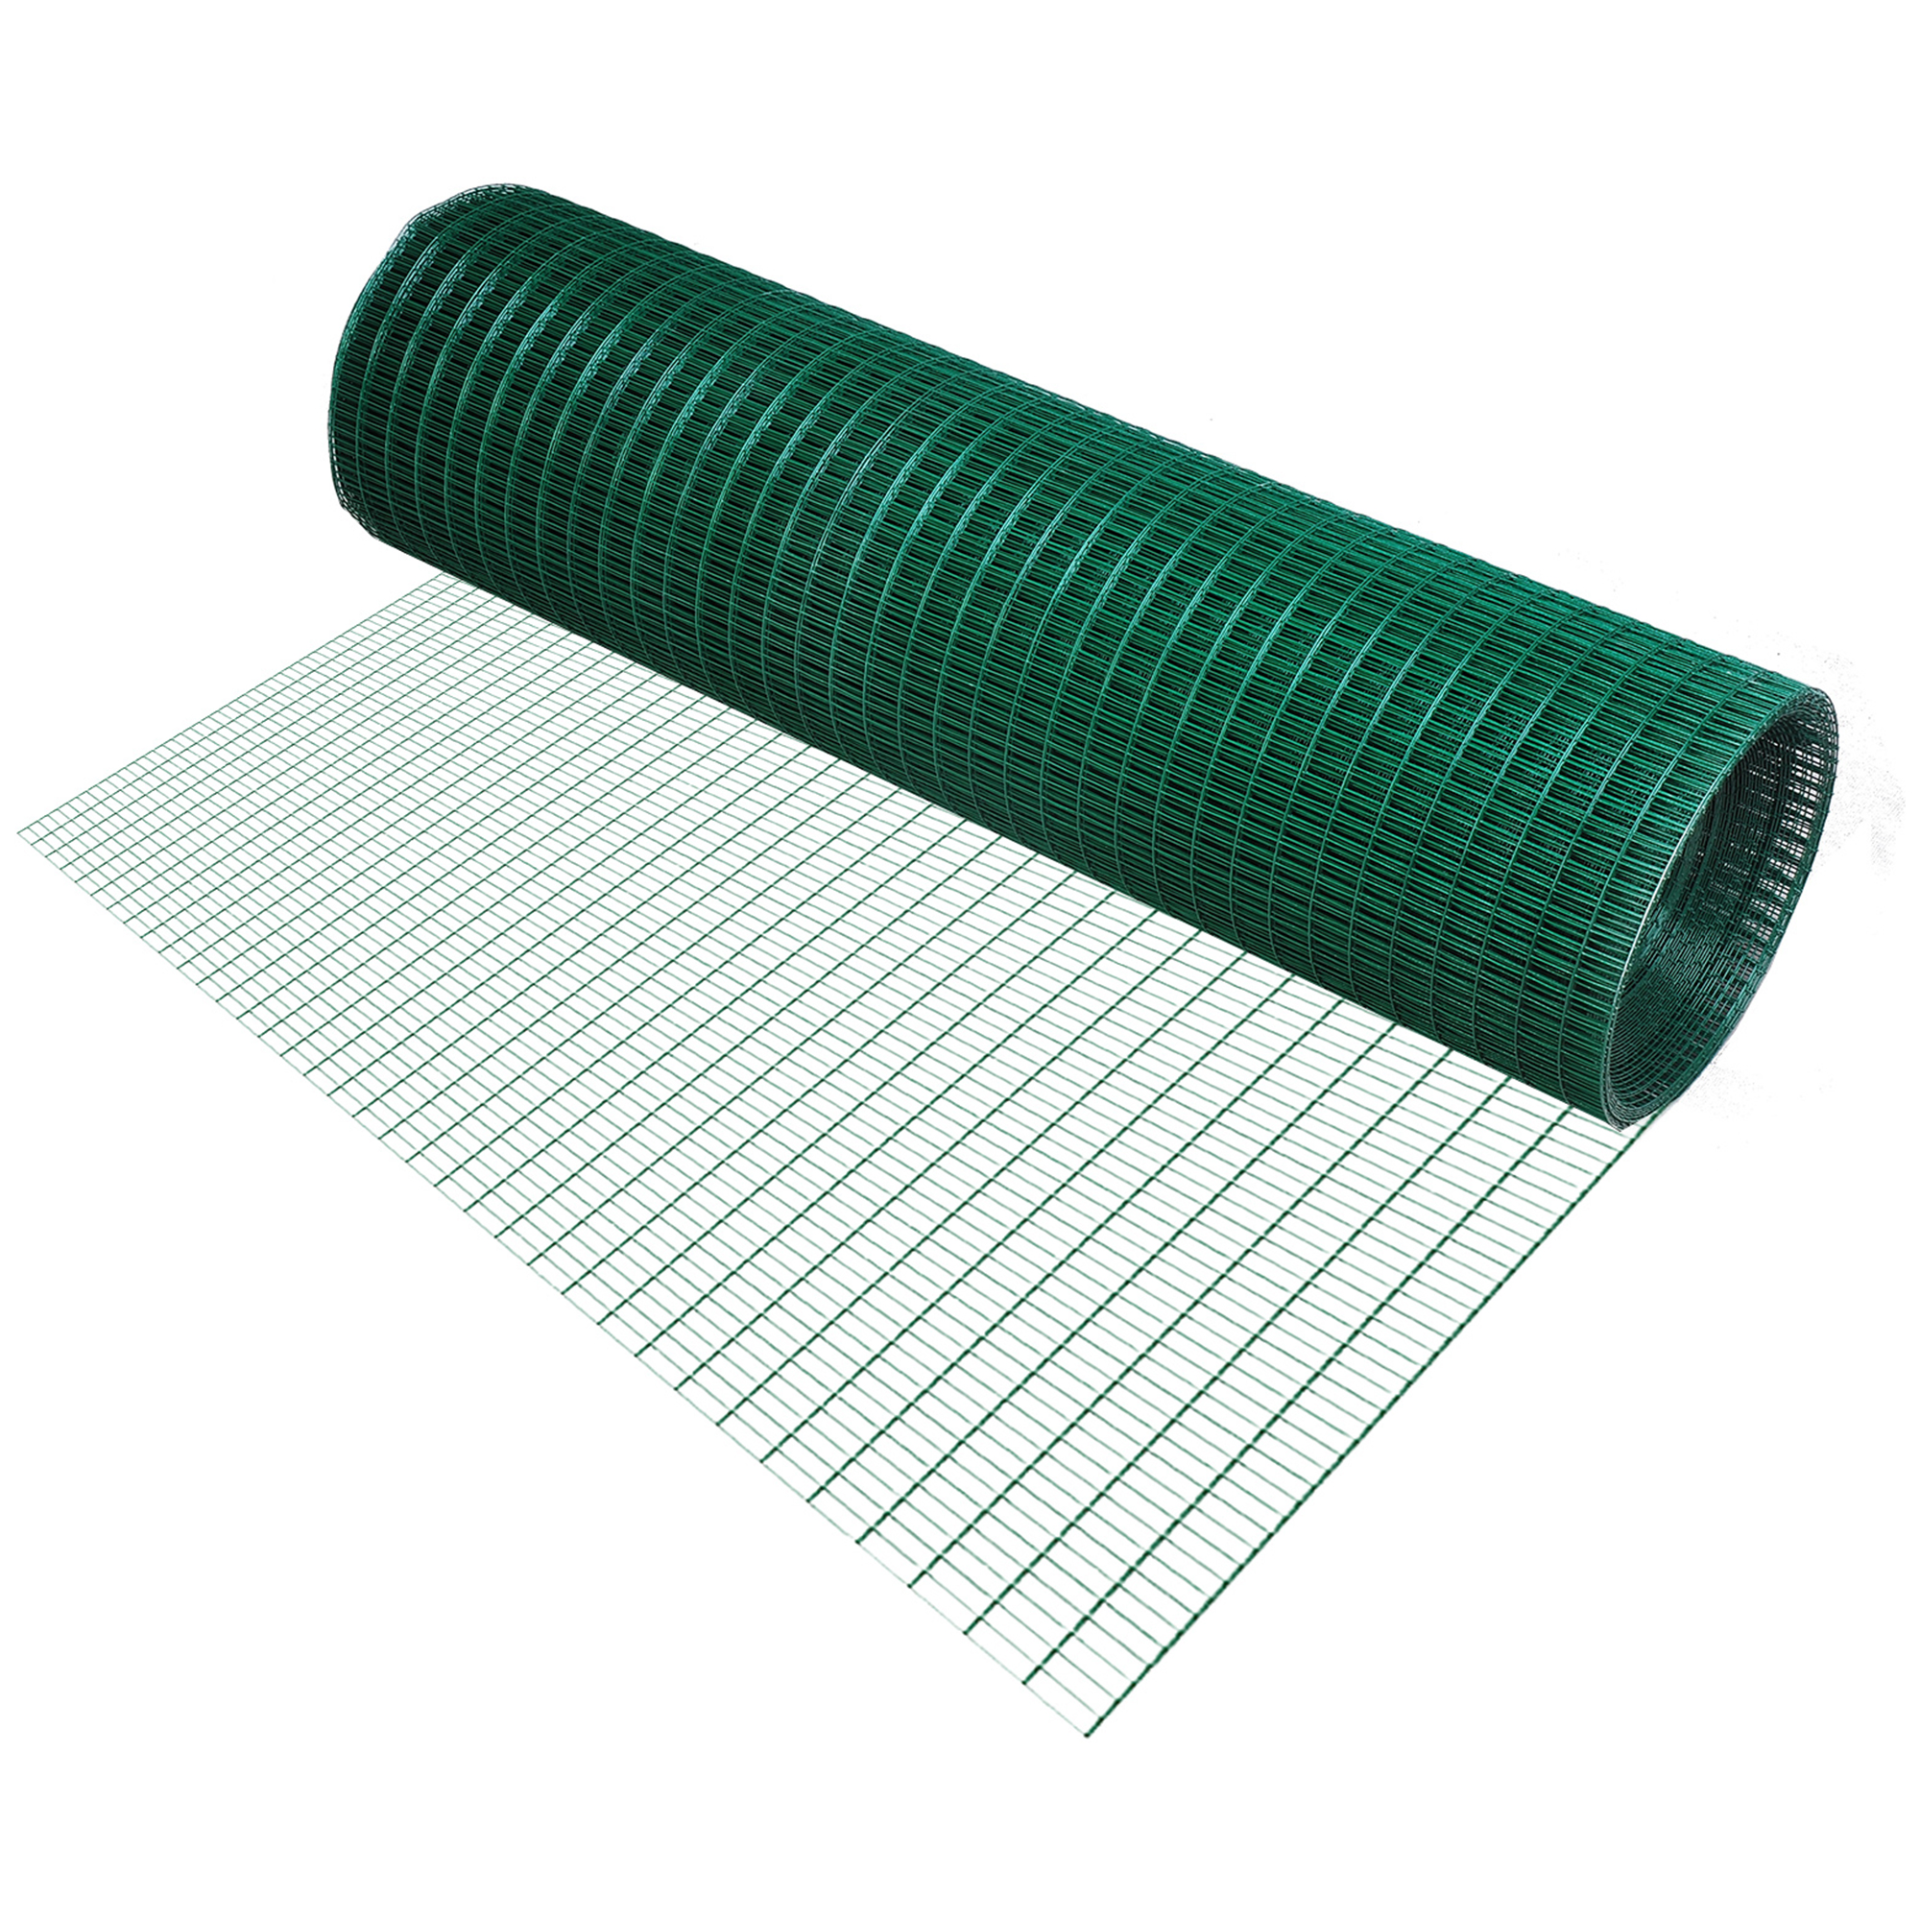 PVC Coated Welded Wire Mesh Fencing 30L x 0.9H m Mesh Size: 2.54L x 1.27H cm.